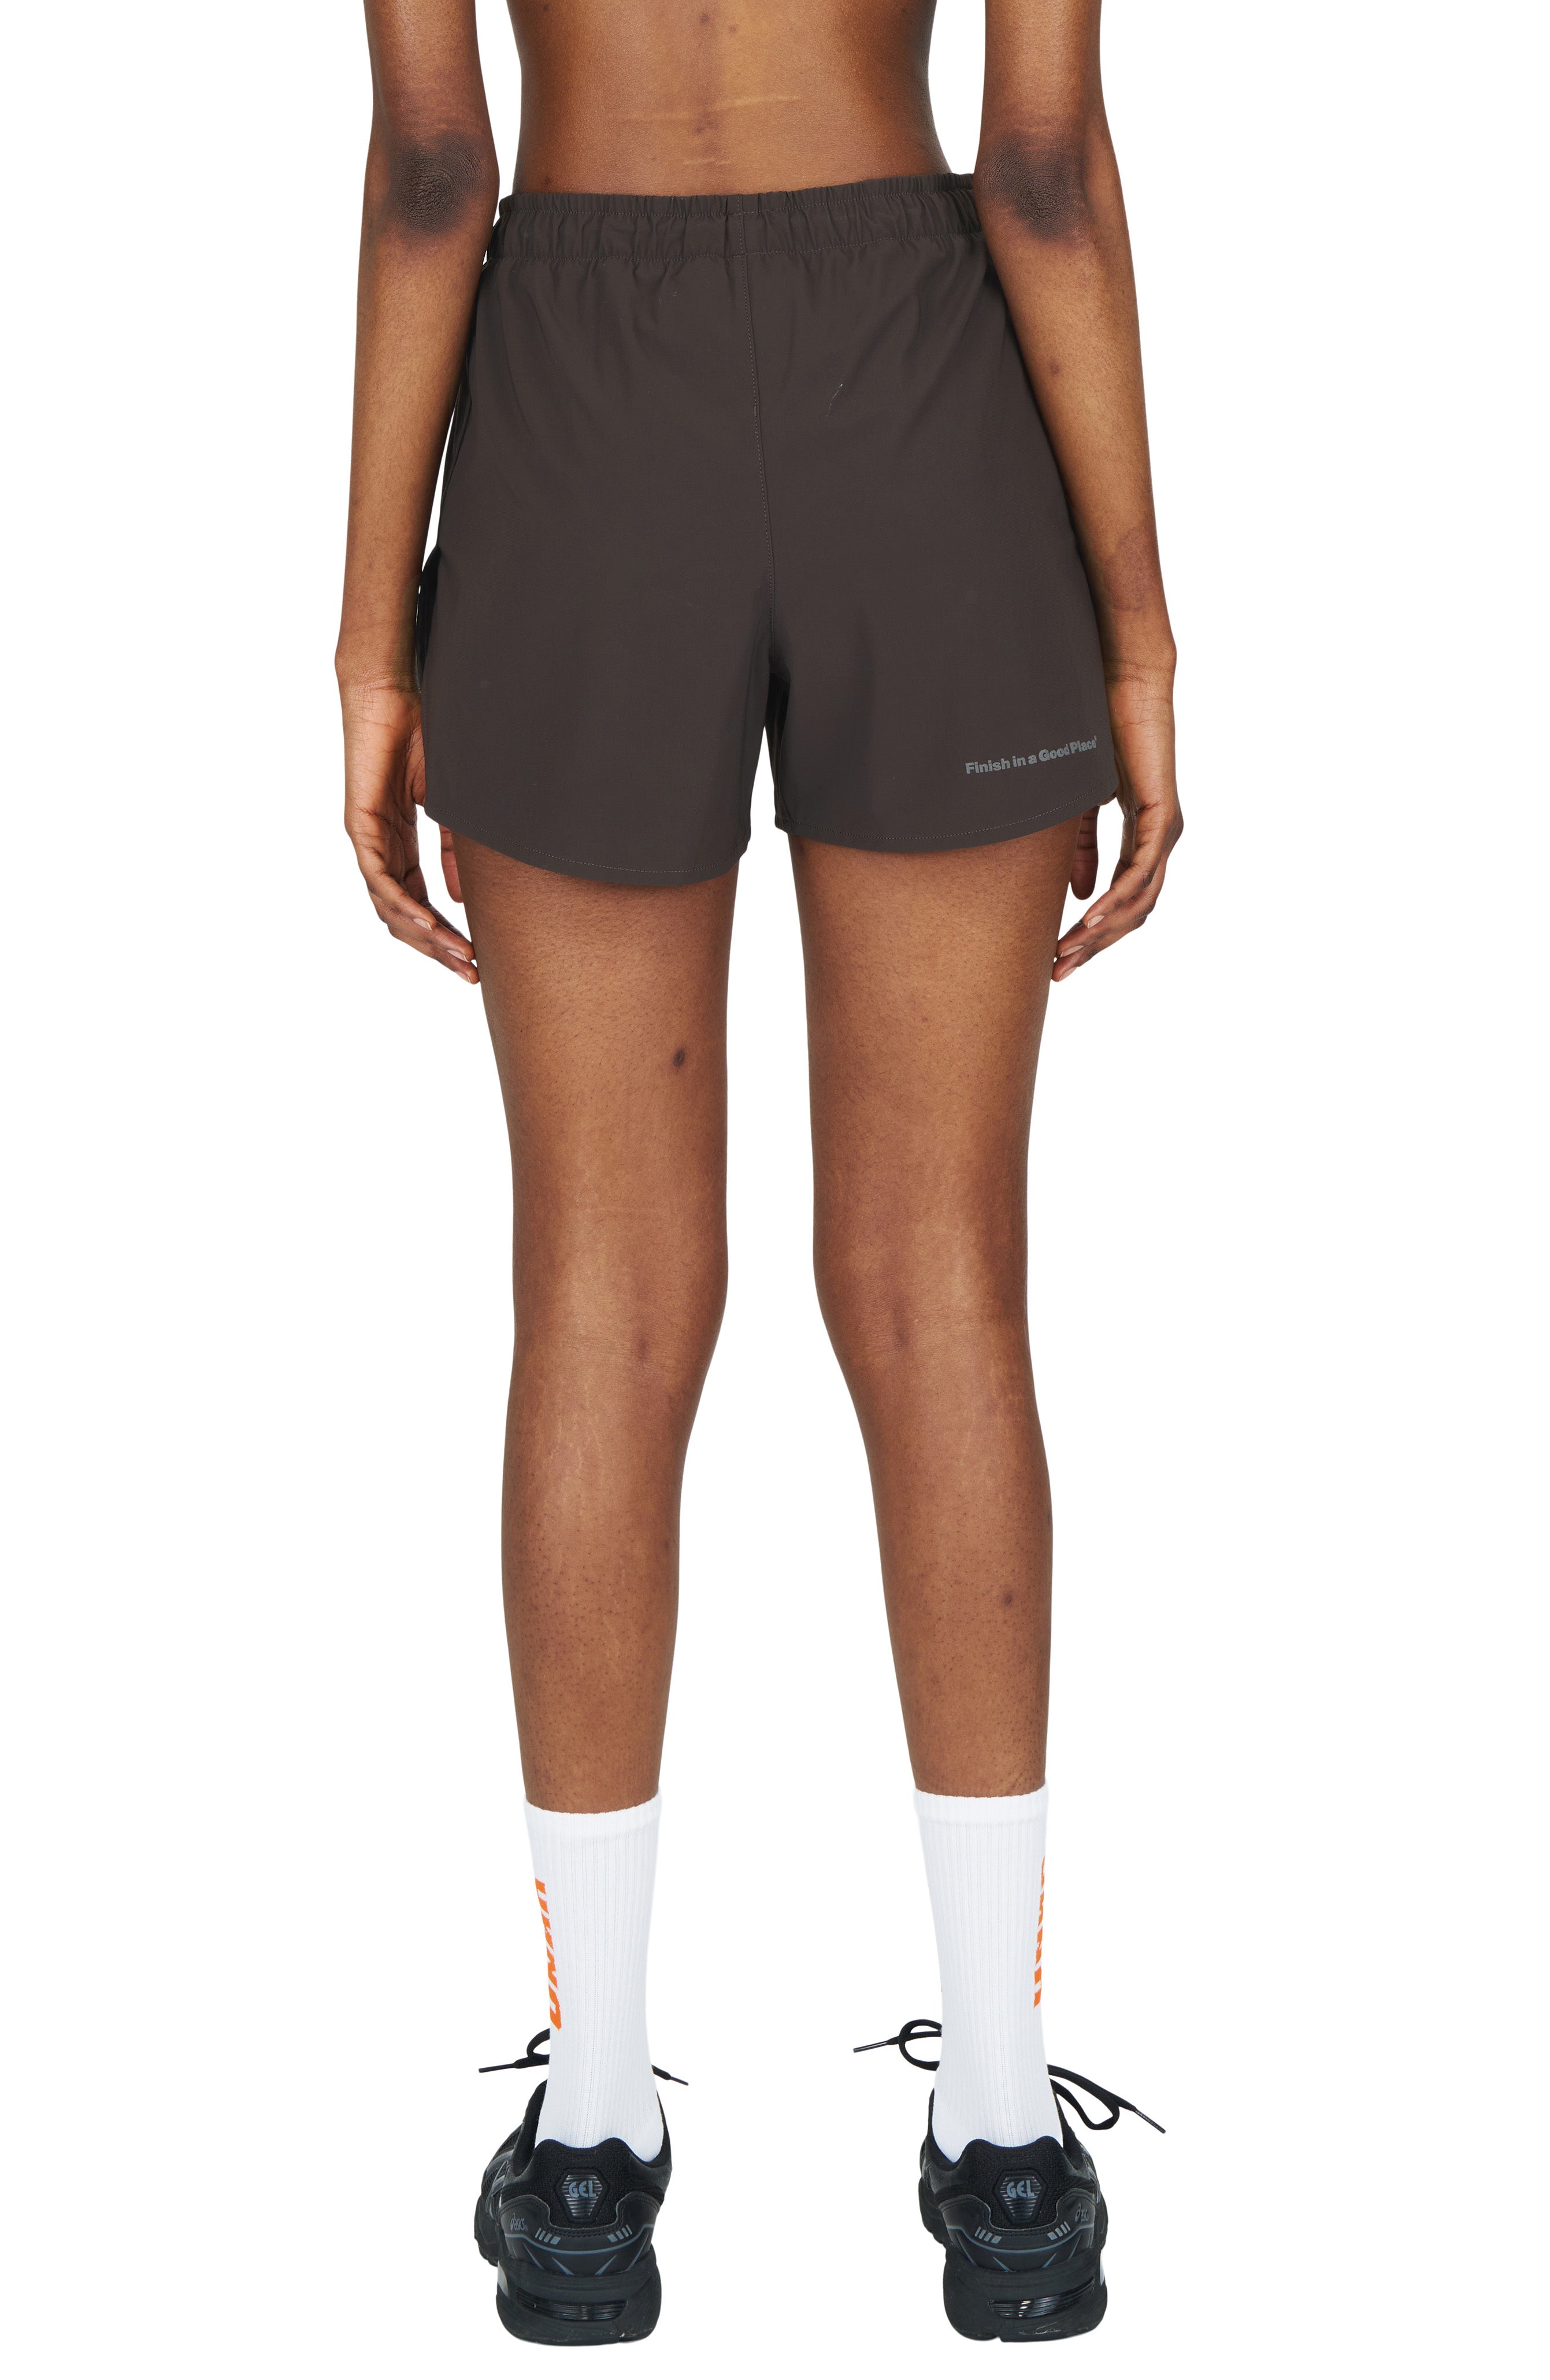 Women's running shorts in Java Brown with a soft stretch and side vents. Podium Logo in the front and reflective 